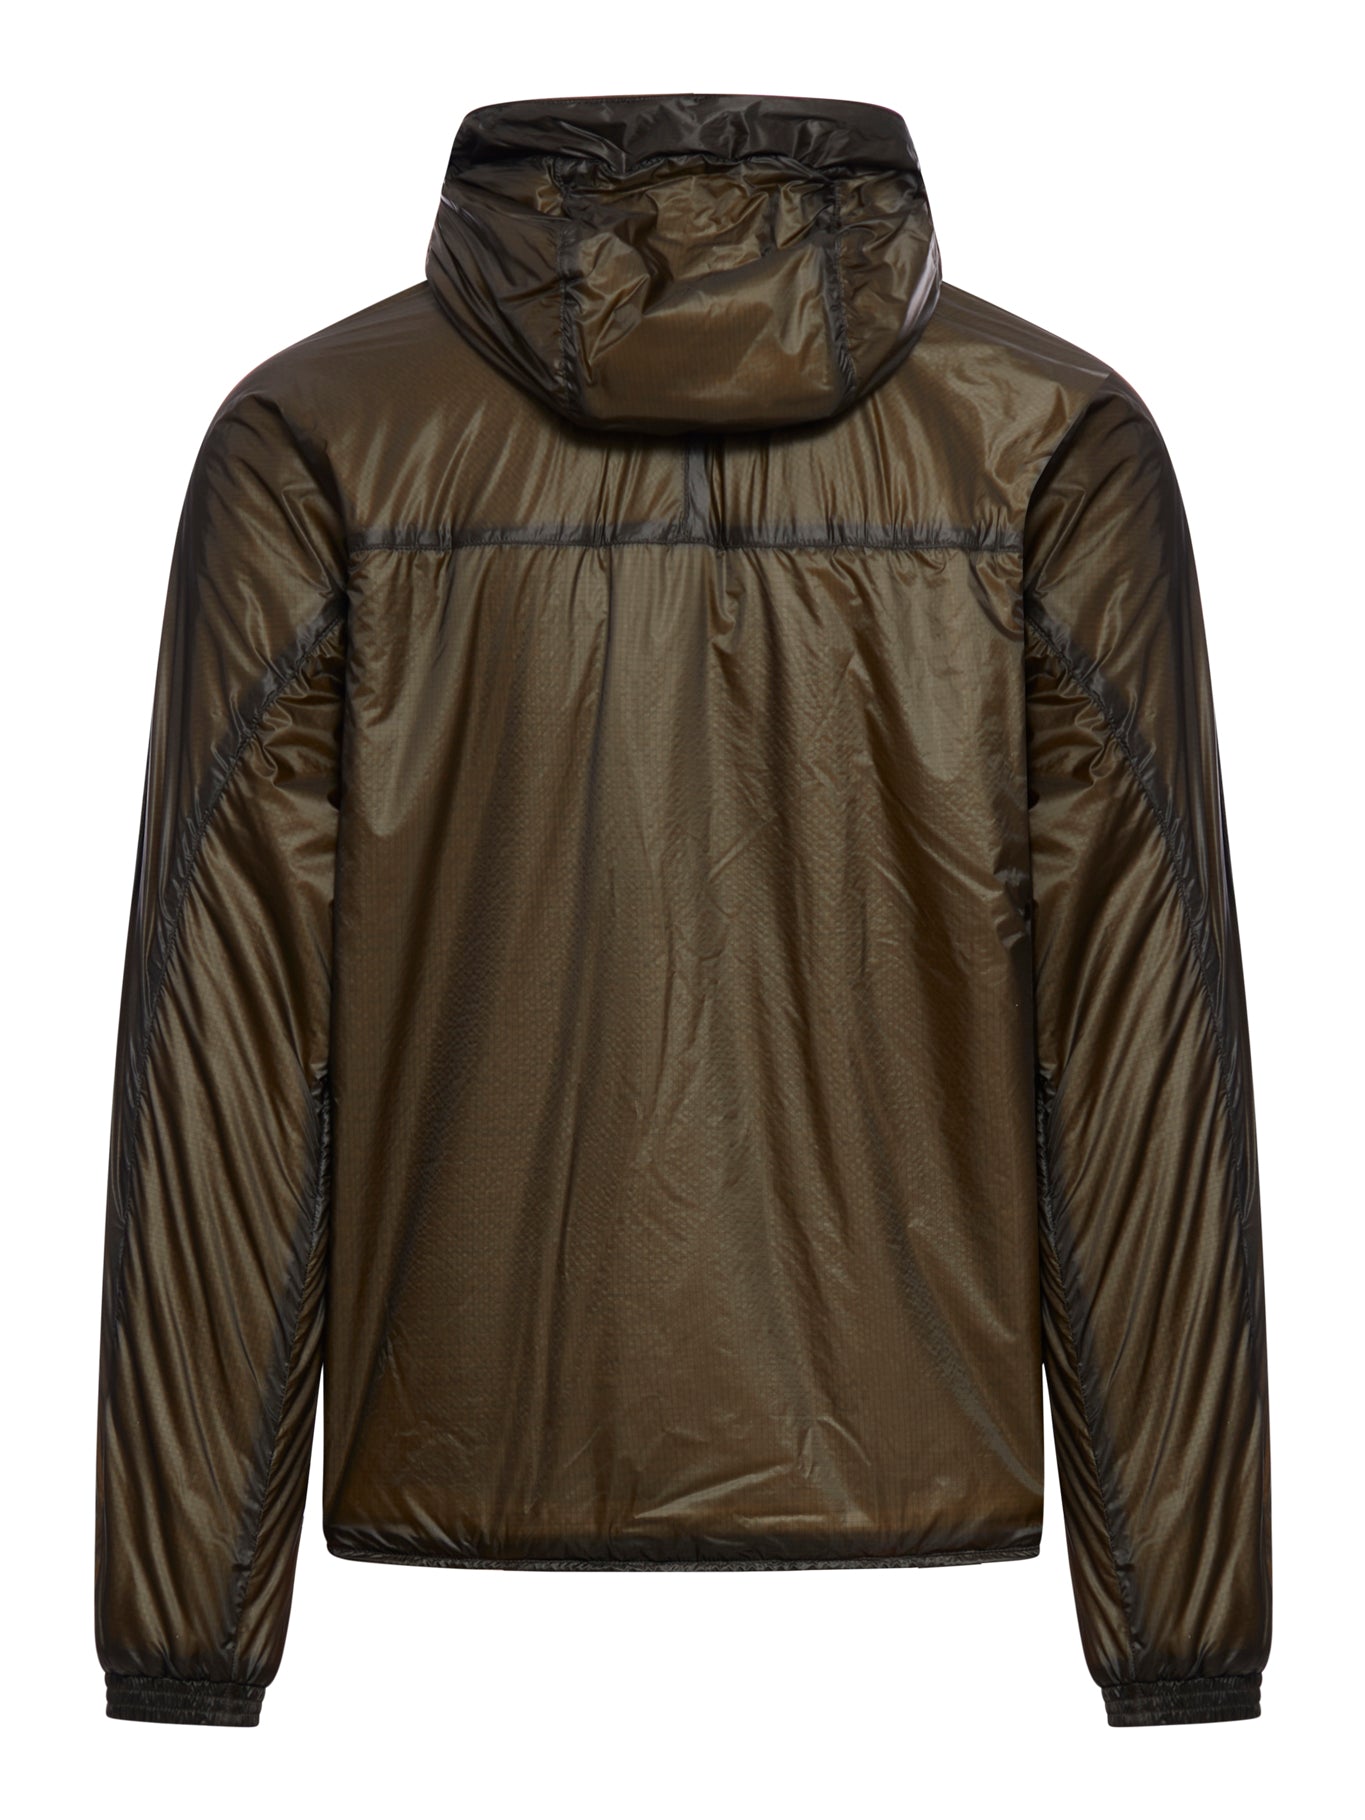 Lightweight jacket with contrasting inserts